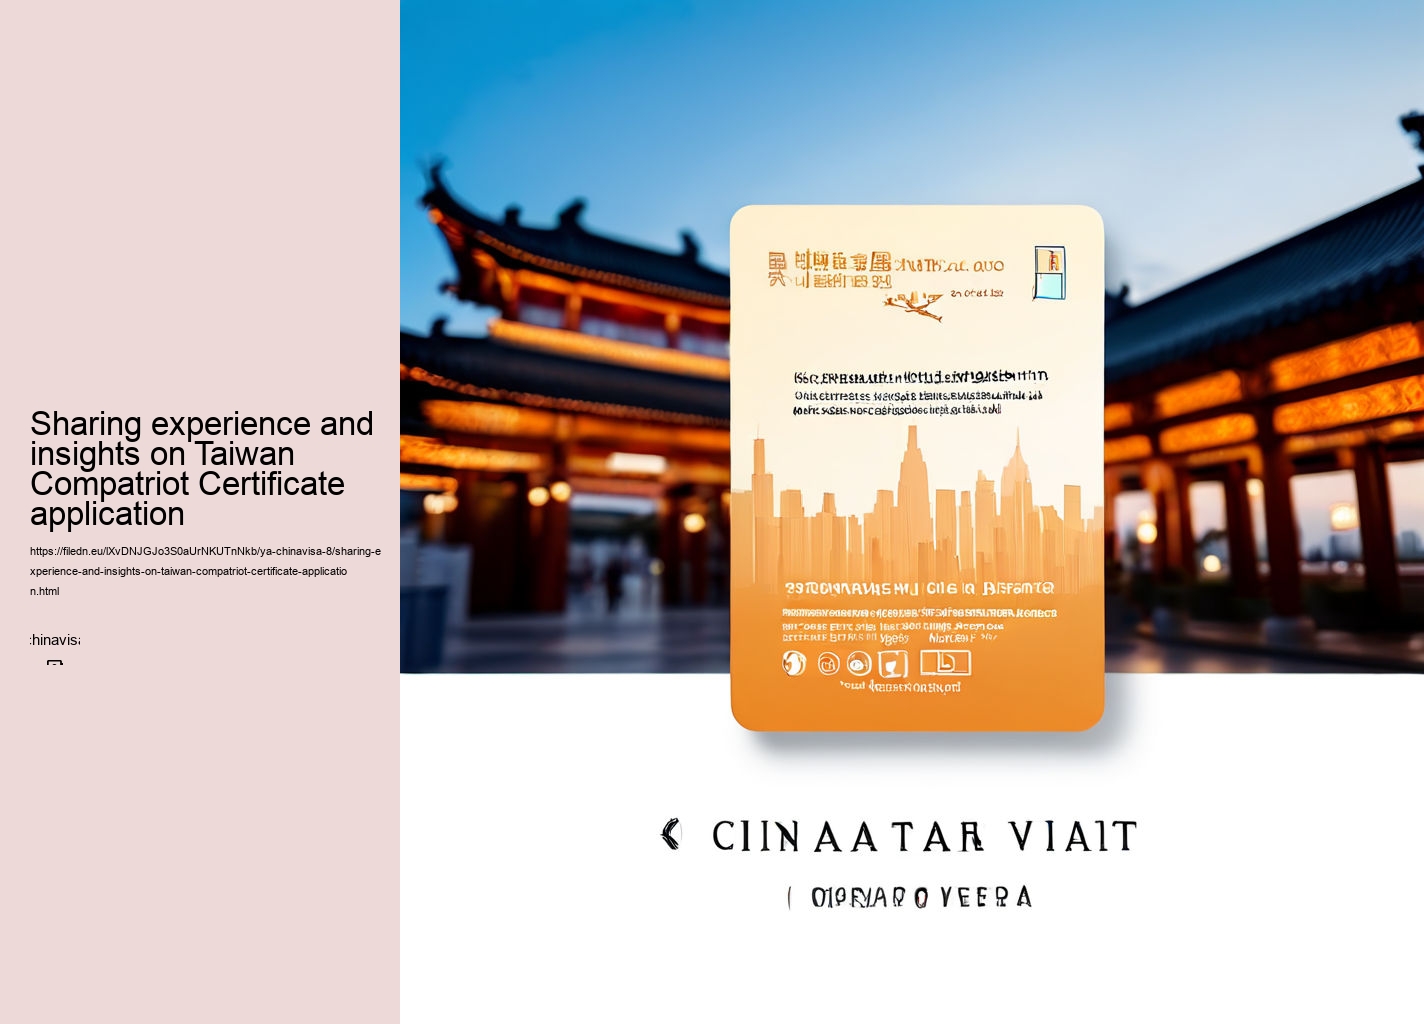 Sharing experience and insights on Taiwan Compatriot Certificate application